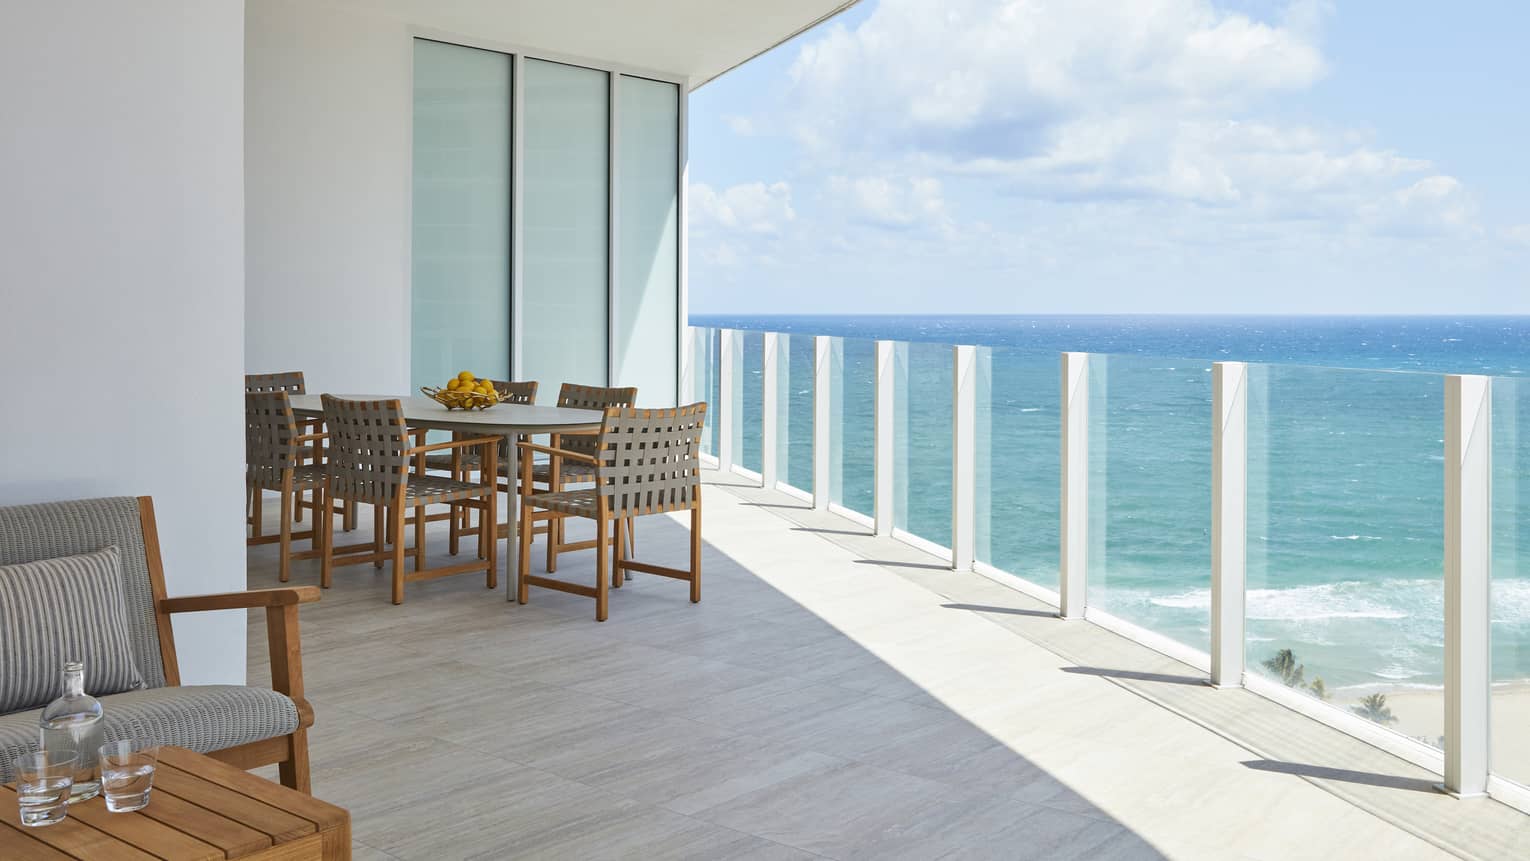 Glass railing balcony with dining table, ocean view